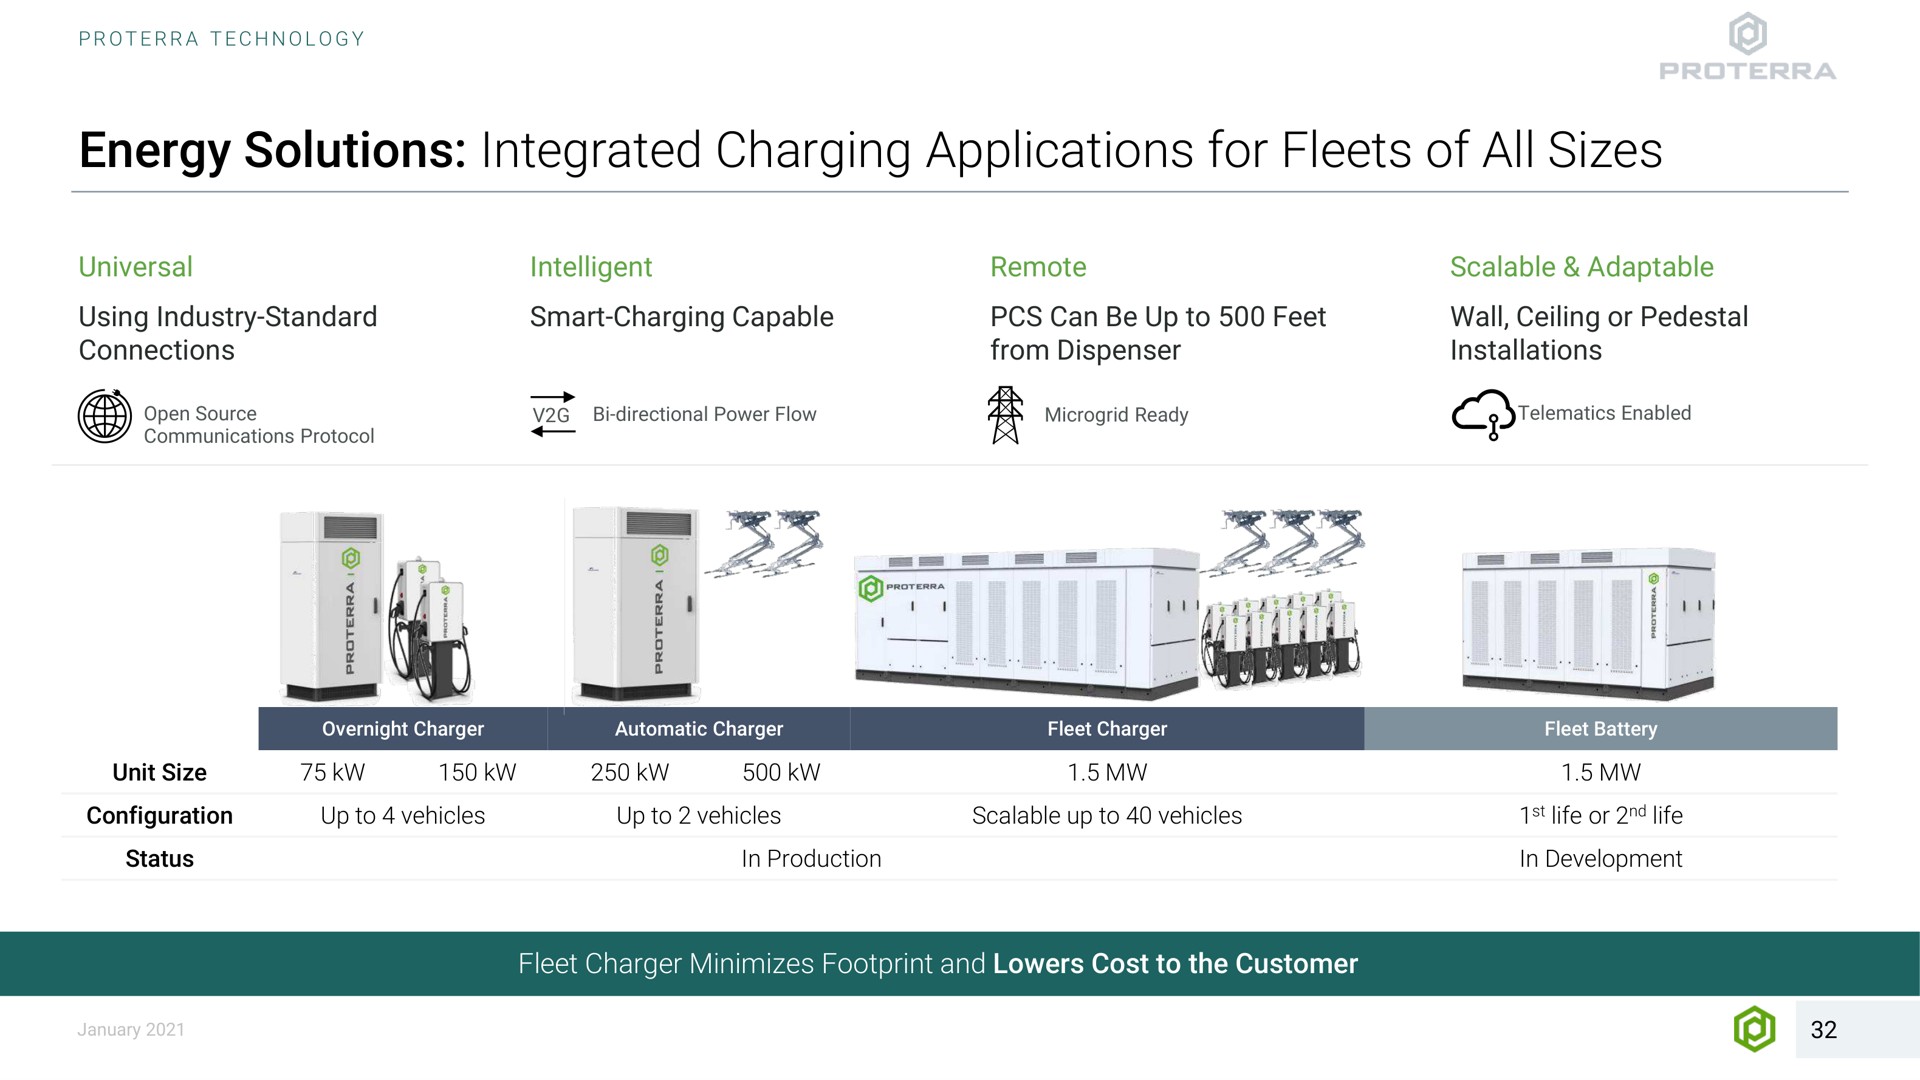 energy solutions integrated charging applications for fleets of all sizes universal intelligent remote scalable adaptable using industry standard connections smart charging capable can be up to feet from dispenser wall ceiling or pedestal installations unit size configuration up to vehicles up to vehicles scalable up to vehicles status in production life or life in development fleet charger minimizes footprint and lowers cost to the customer | Proterra